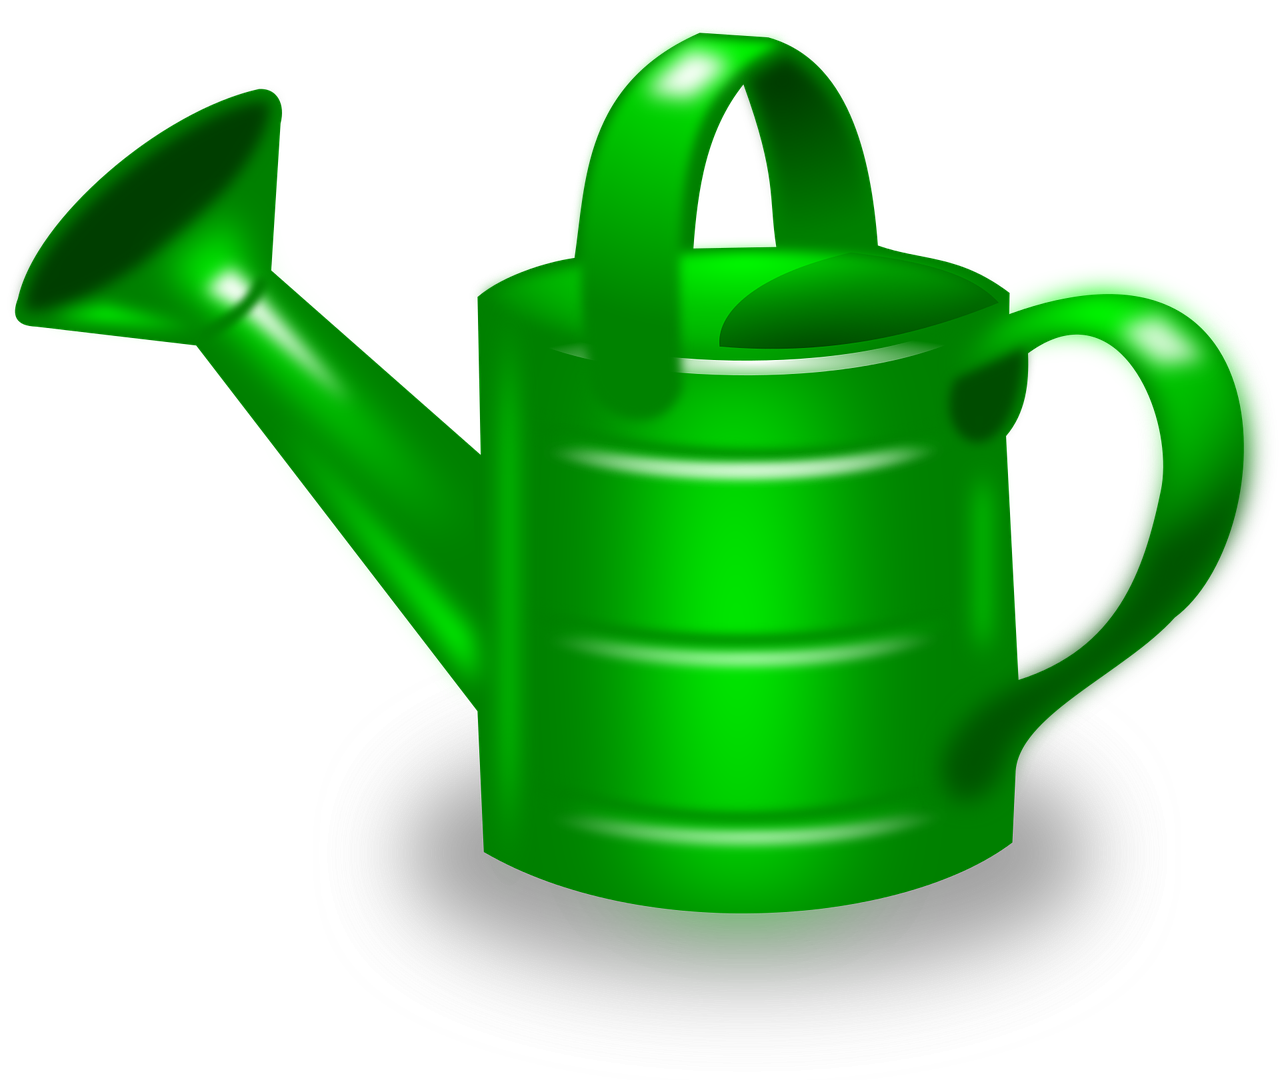 Clipart image ofawatering can